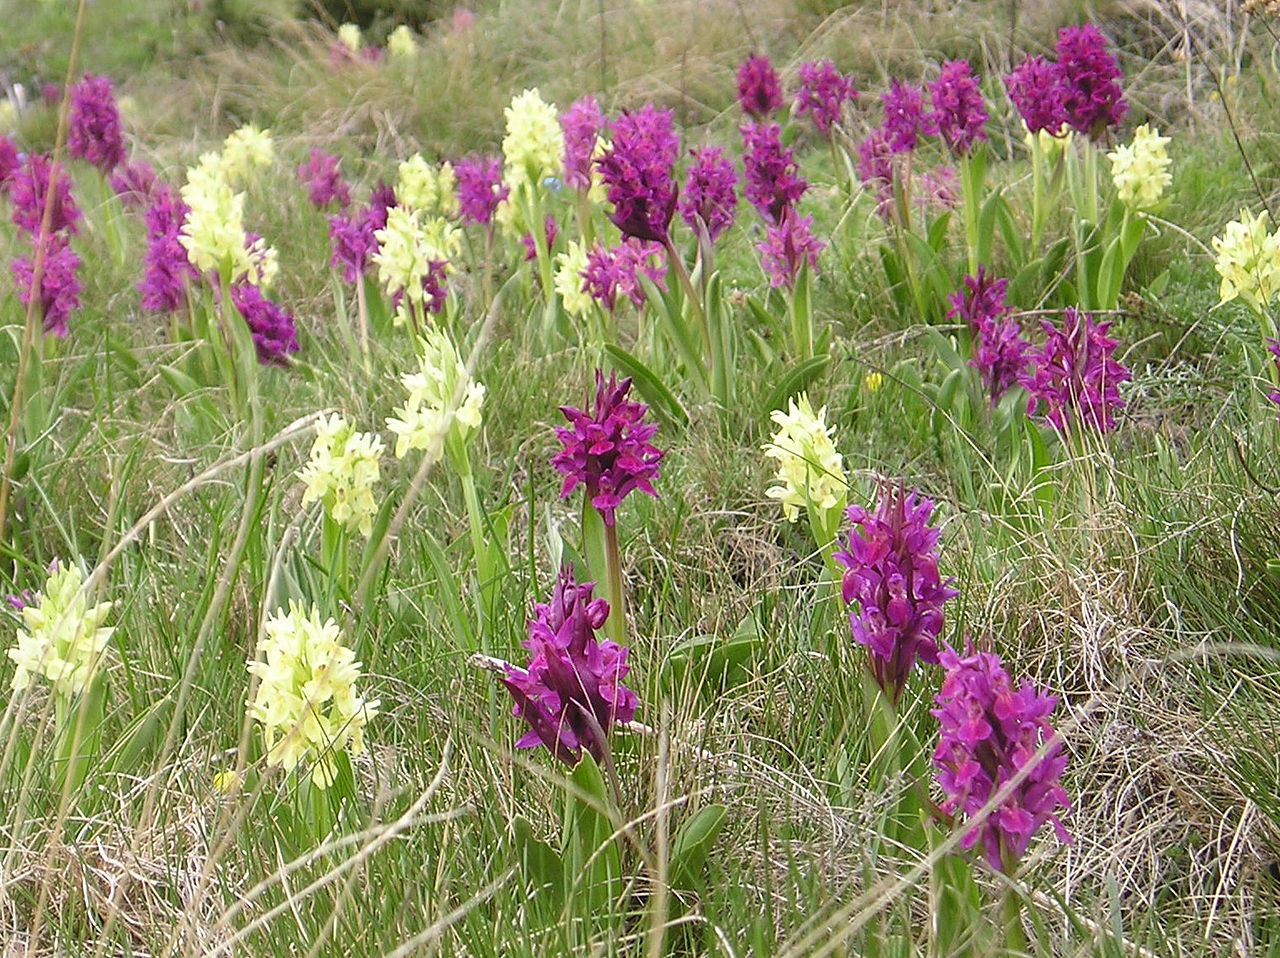 *Dactylorhiza sambucina* (yellow and purple/red forms growing together) in Andorra. Photo by Strobilomyces, [CC BY-SA 3.0](https://creativecommons.org/licenses/by-sa/3.0), via Wikimedia Commons.